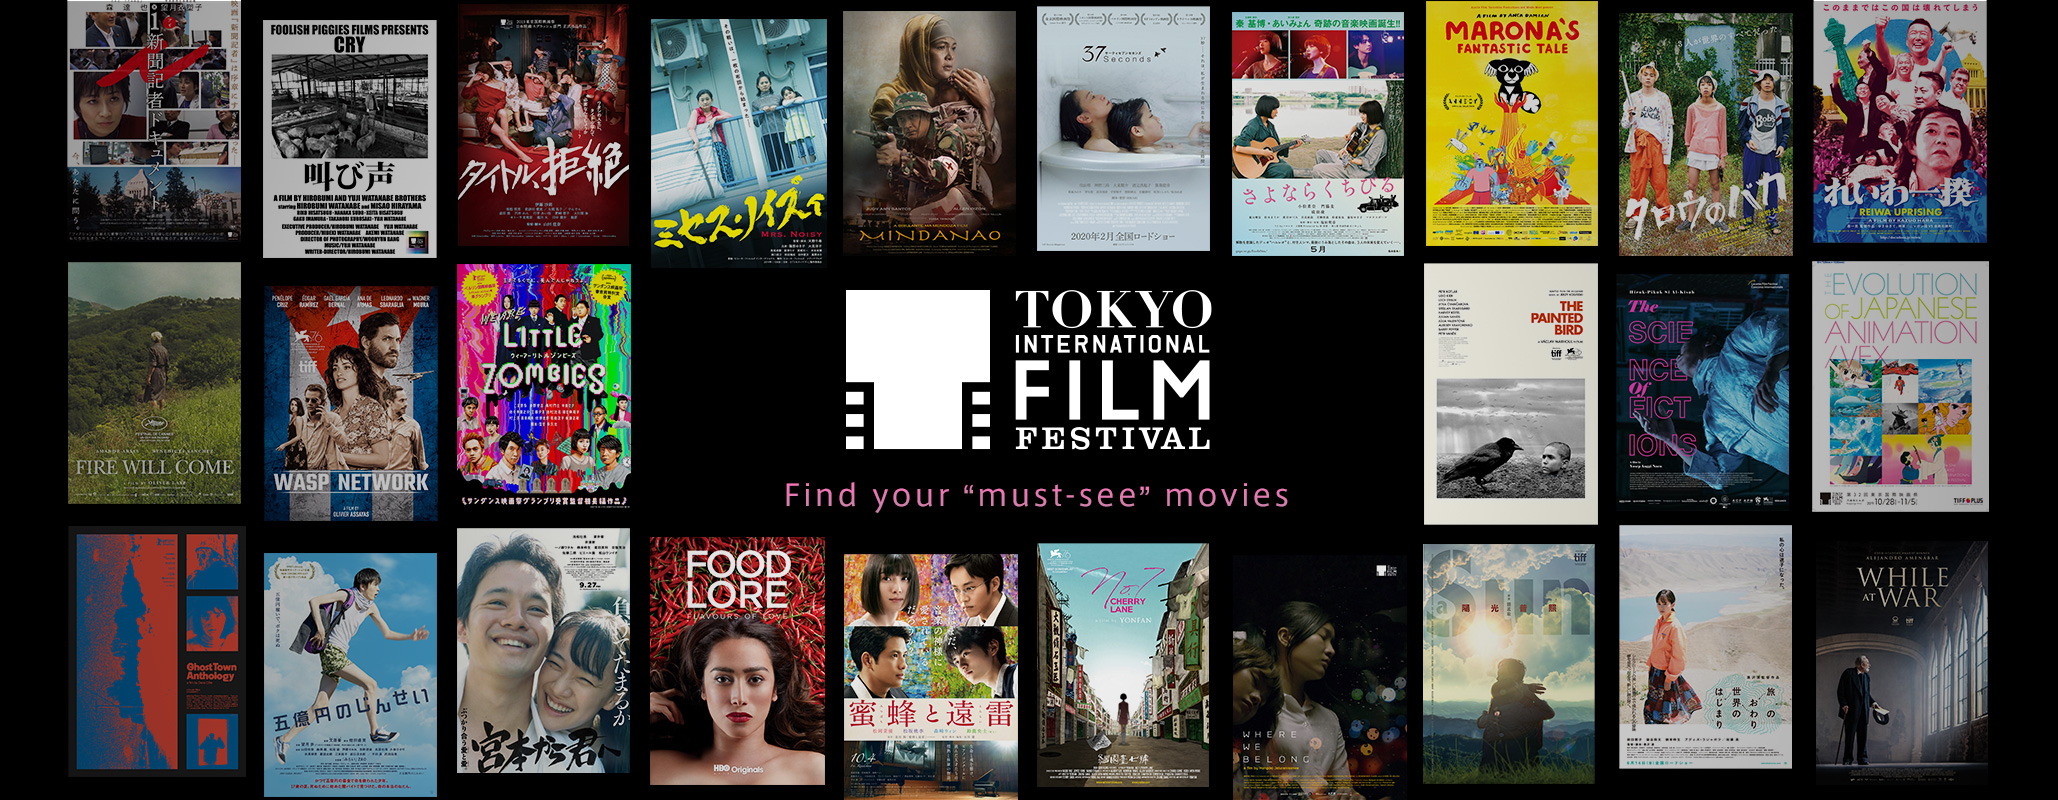 Find your "must-see" movies